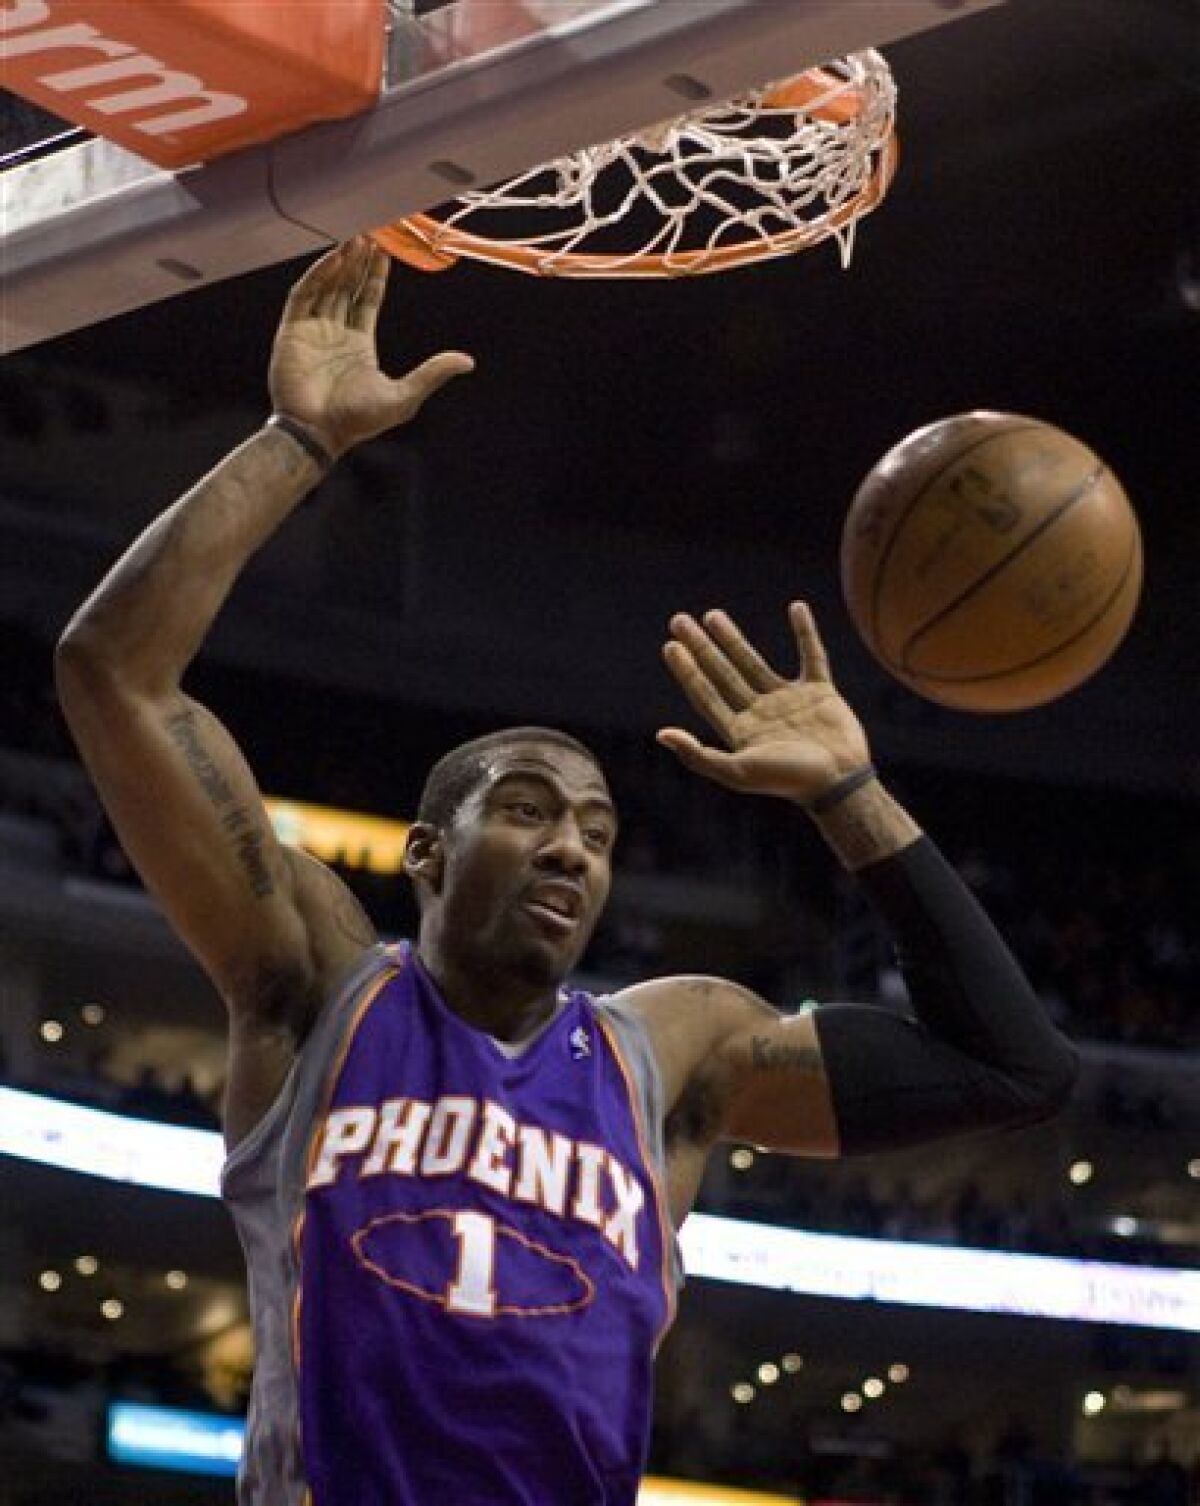 This Feb. 18, 2009 file photo shows Phoenix Suns' Amare Stoudemire scoring against the Los Angeles Clippers during the first quarter of an NBA basketball game in Los Angeles. The Phoenix Suns say Stoudemire will be out about eight weeks after eye surgery. The surgery to repair a partially detached retina in Stoudemire's right eye was performed Friday morning Feb. 20. (AP Photo/Hector Mata, File)